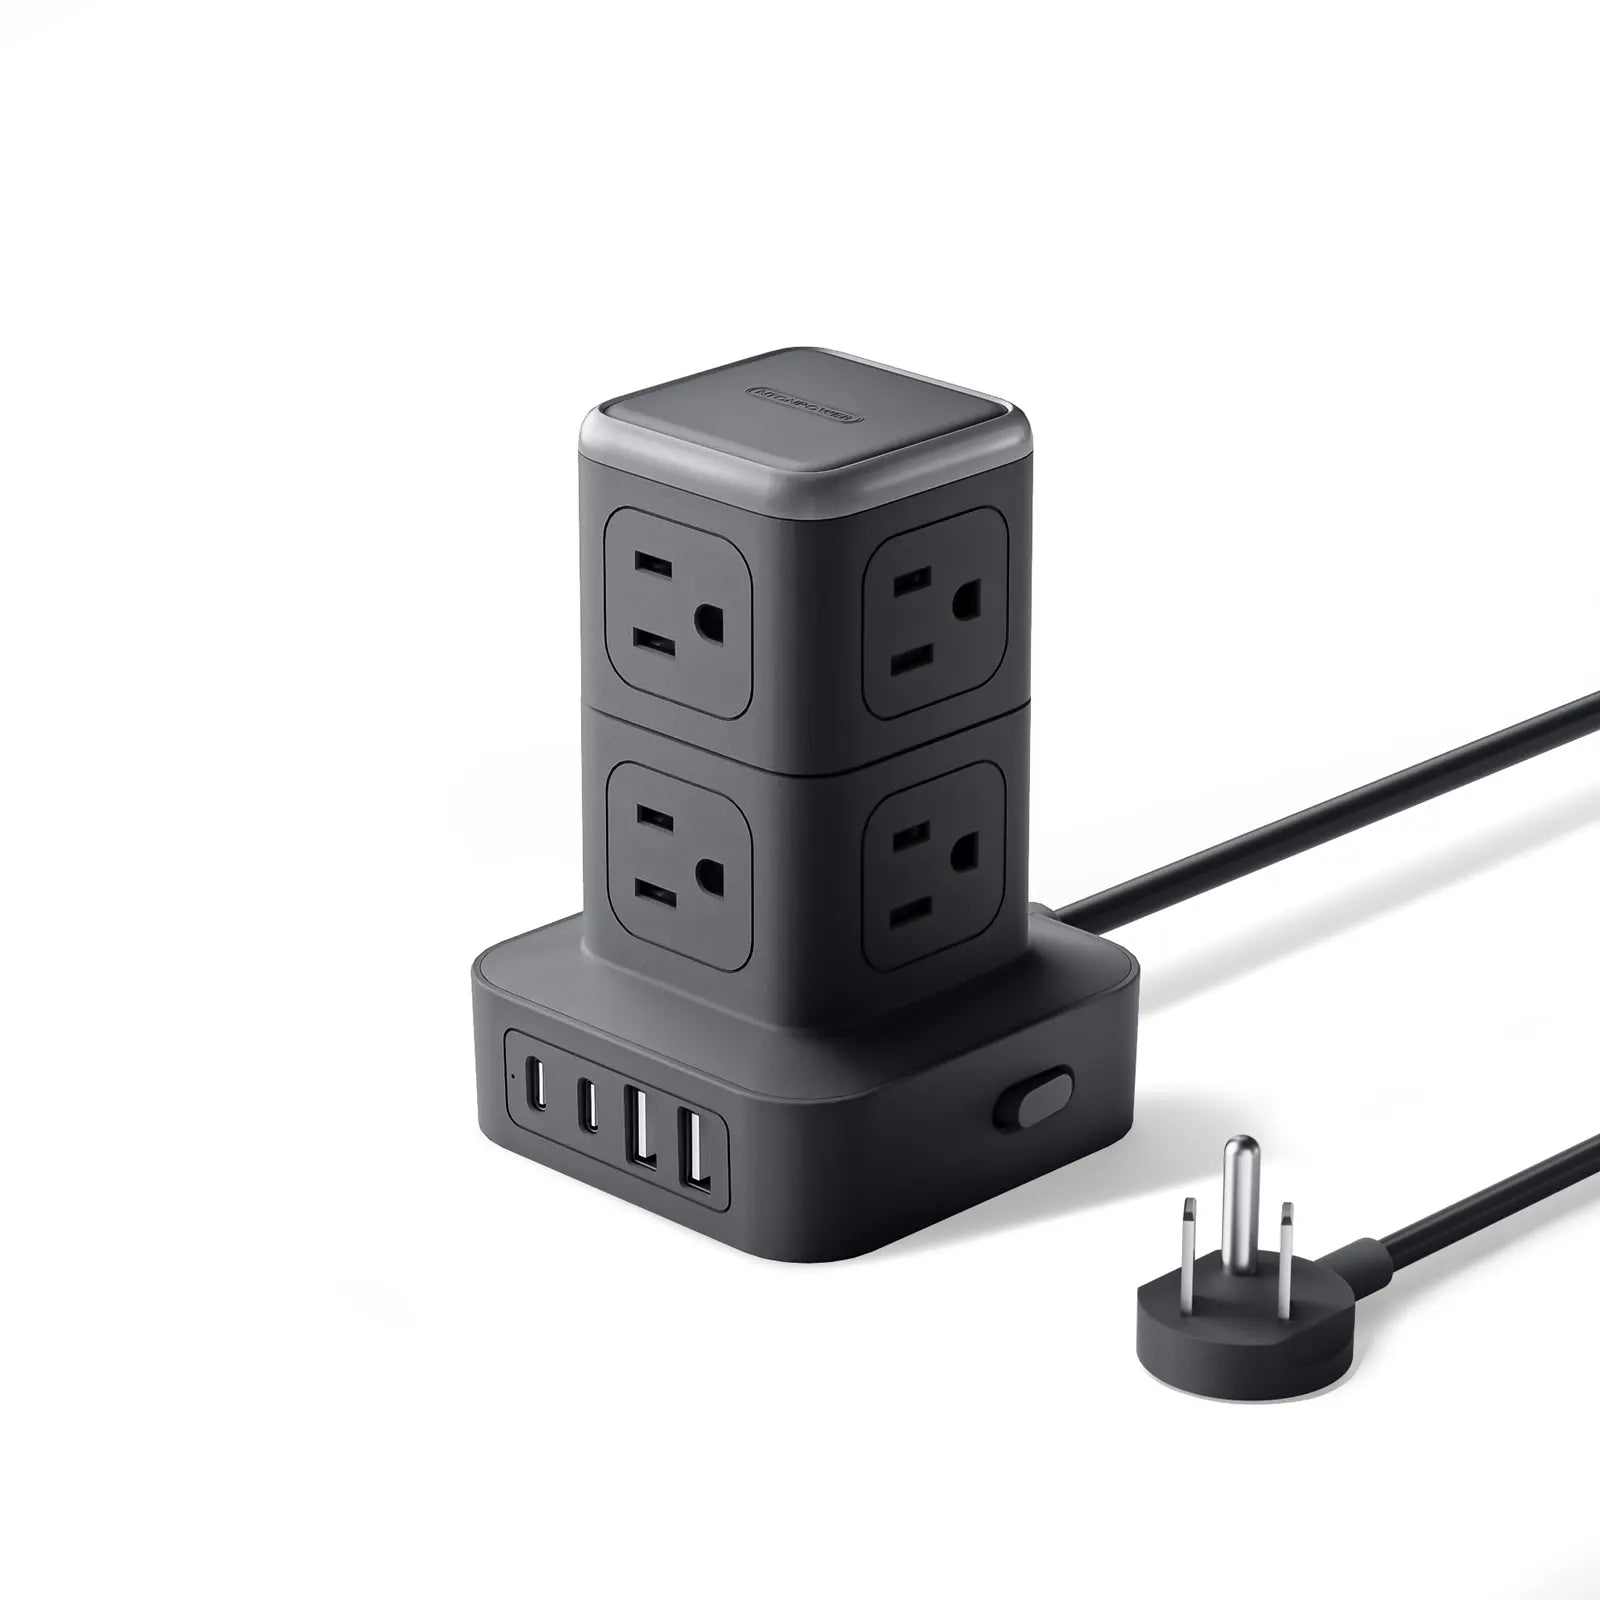 Ntonpower New Surge Protector Power Strip Tower 8 Outlets 2 USB-A 2 USB-C